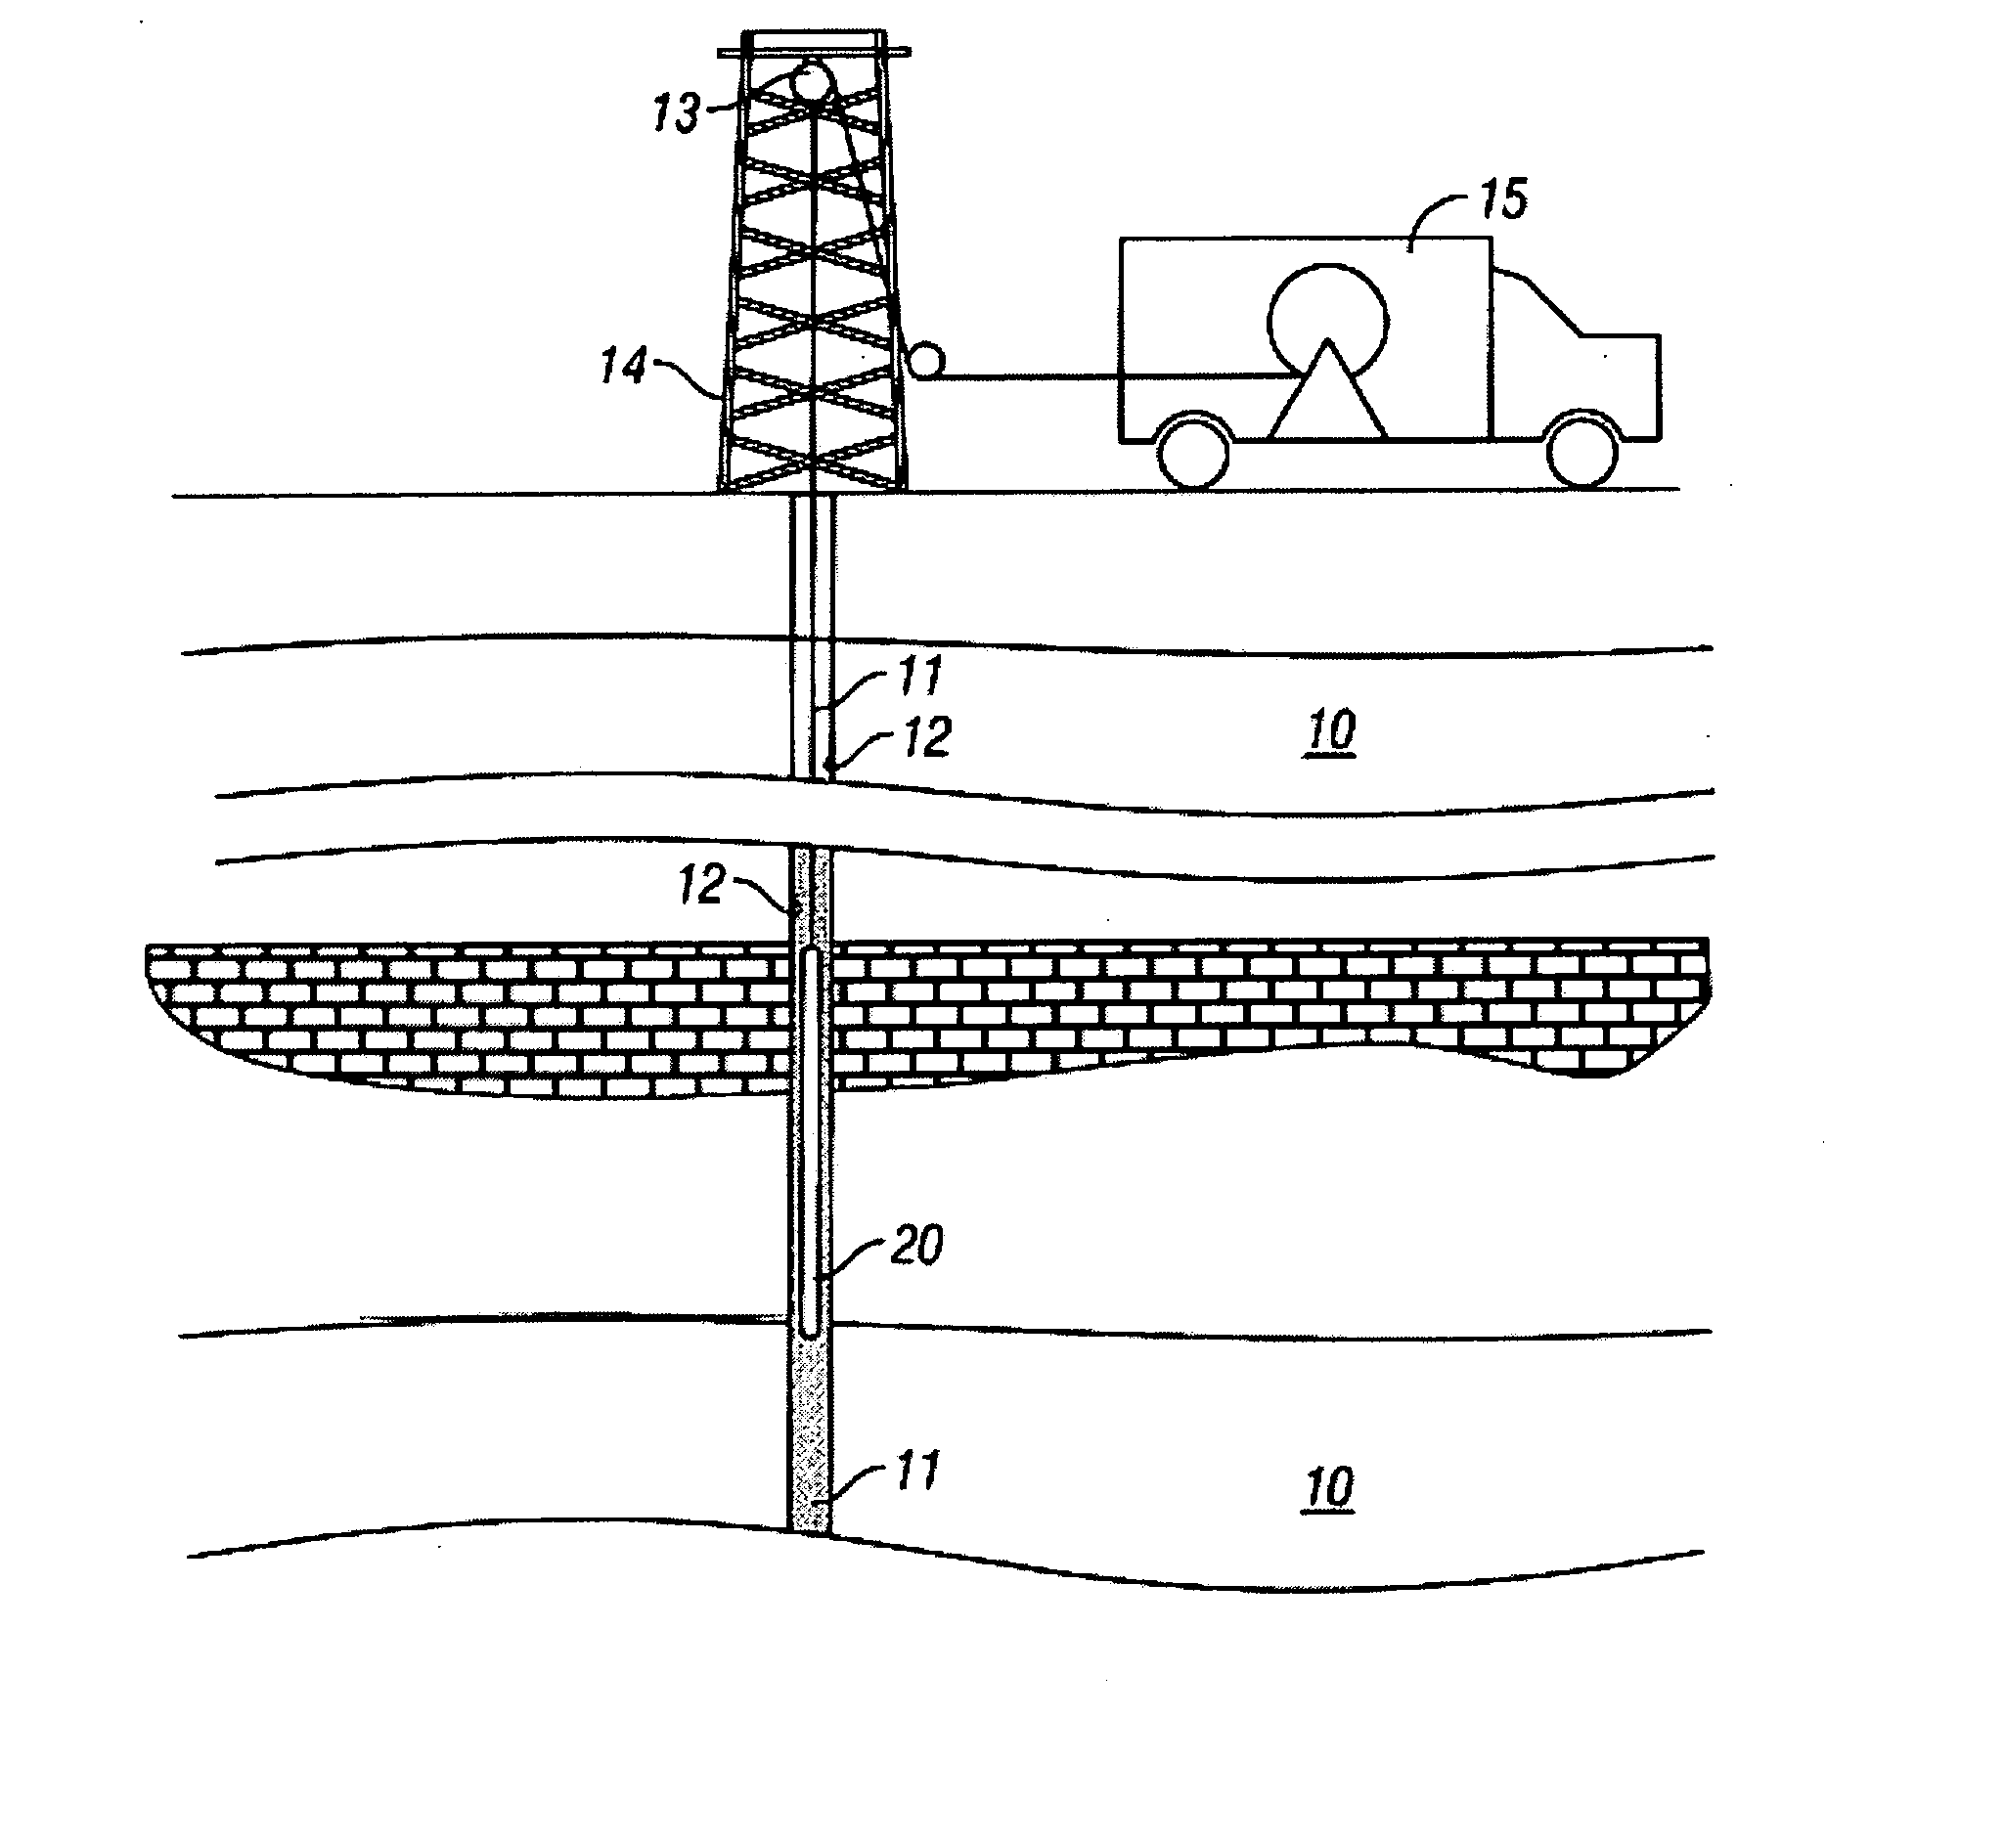 Light source for a downhole spectrometer